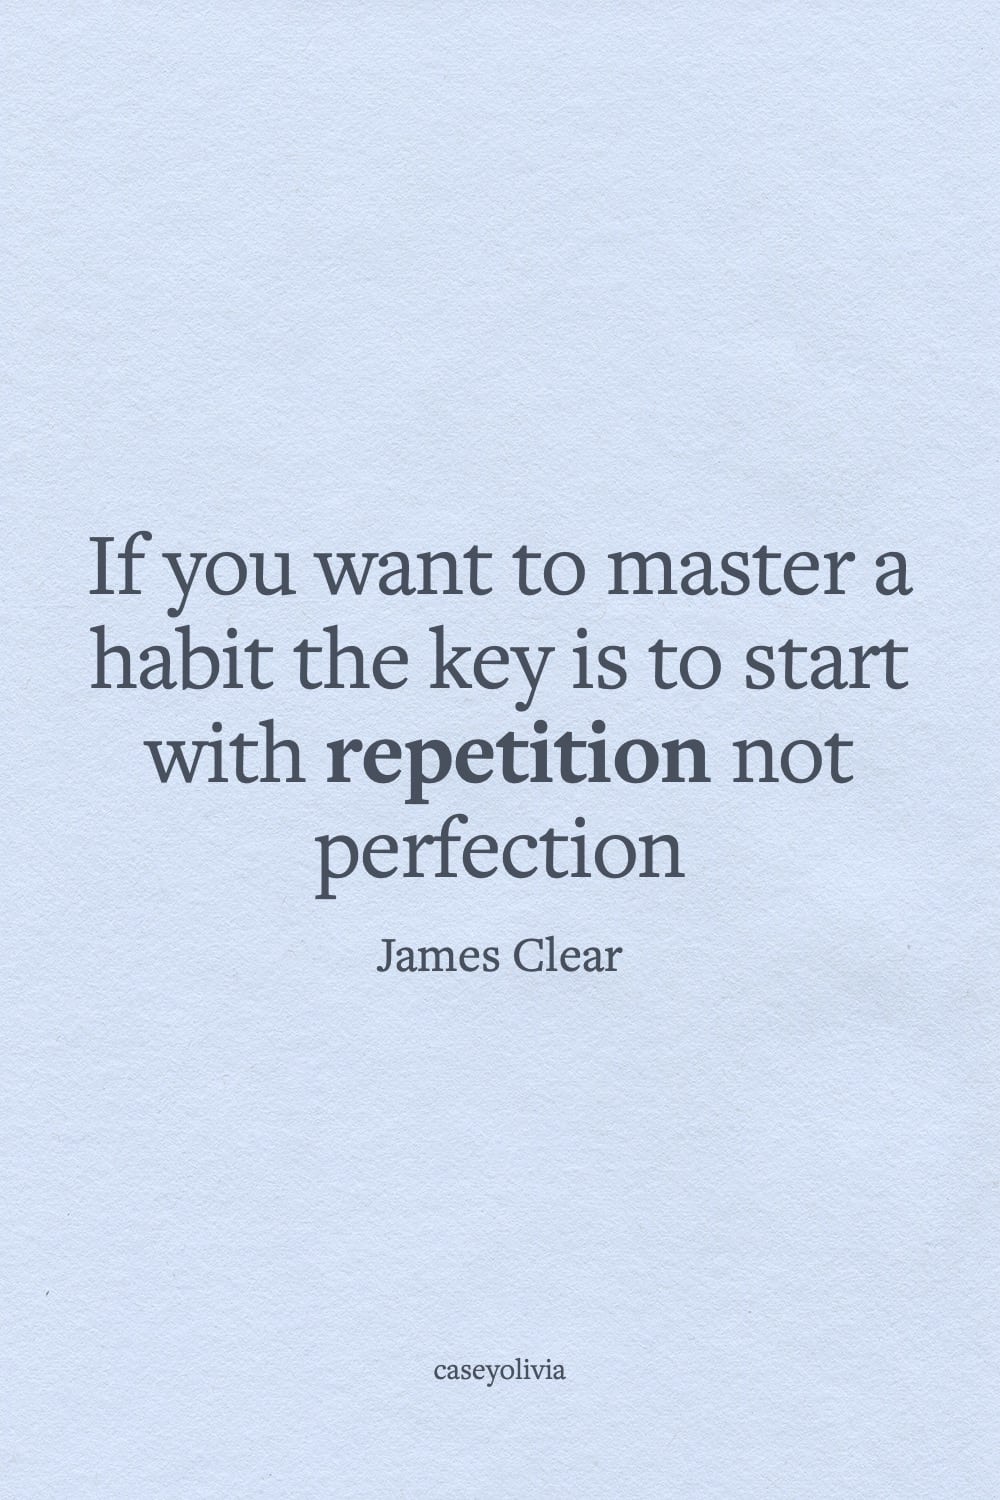 james clear habit mastery caption for instagram